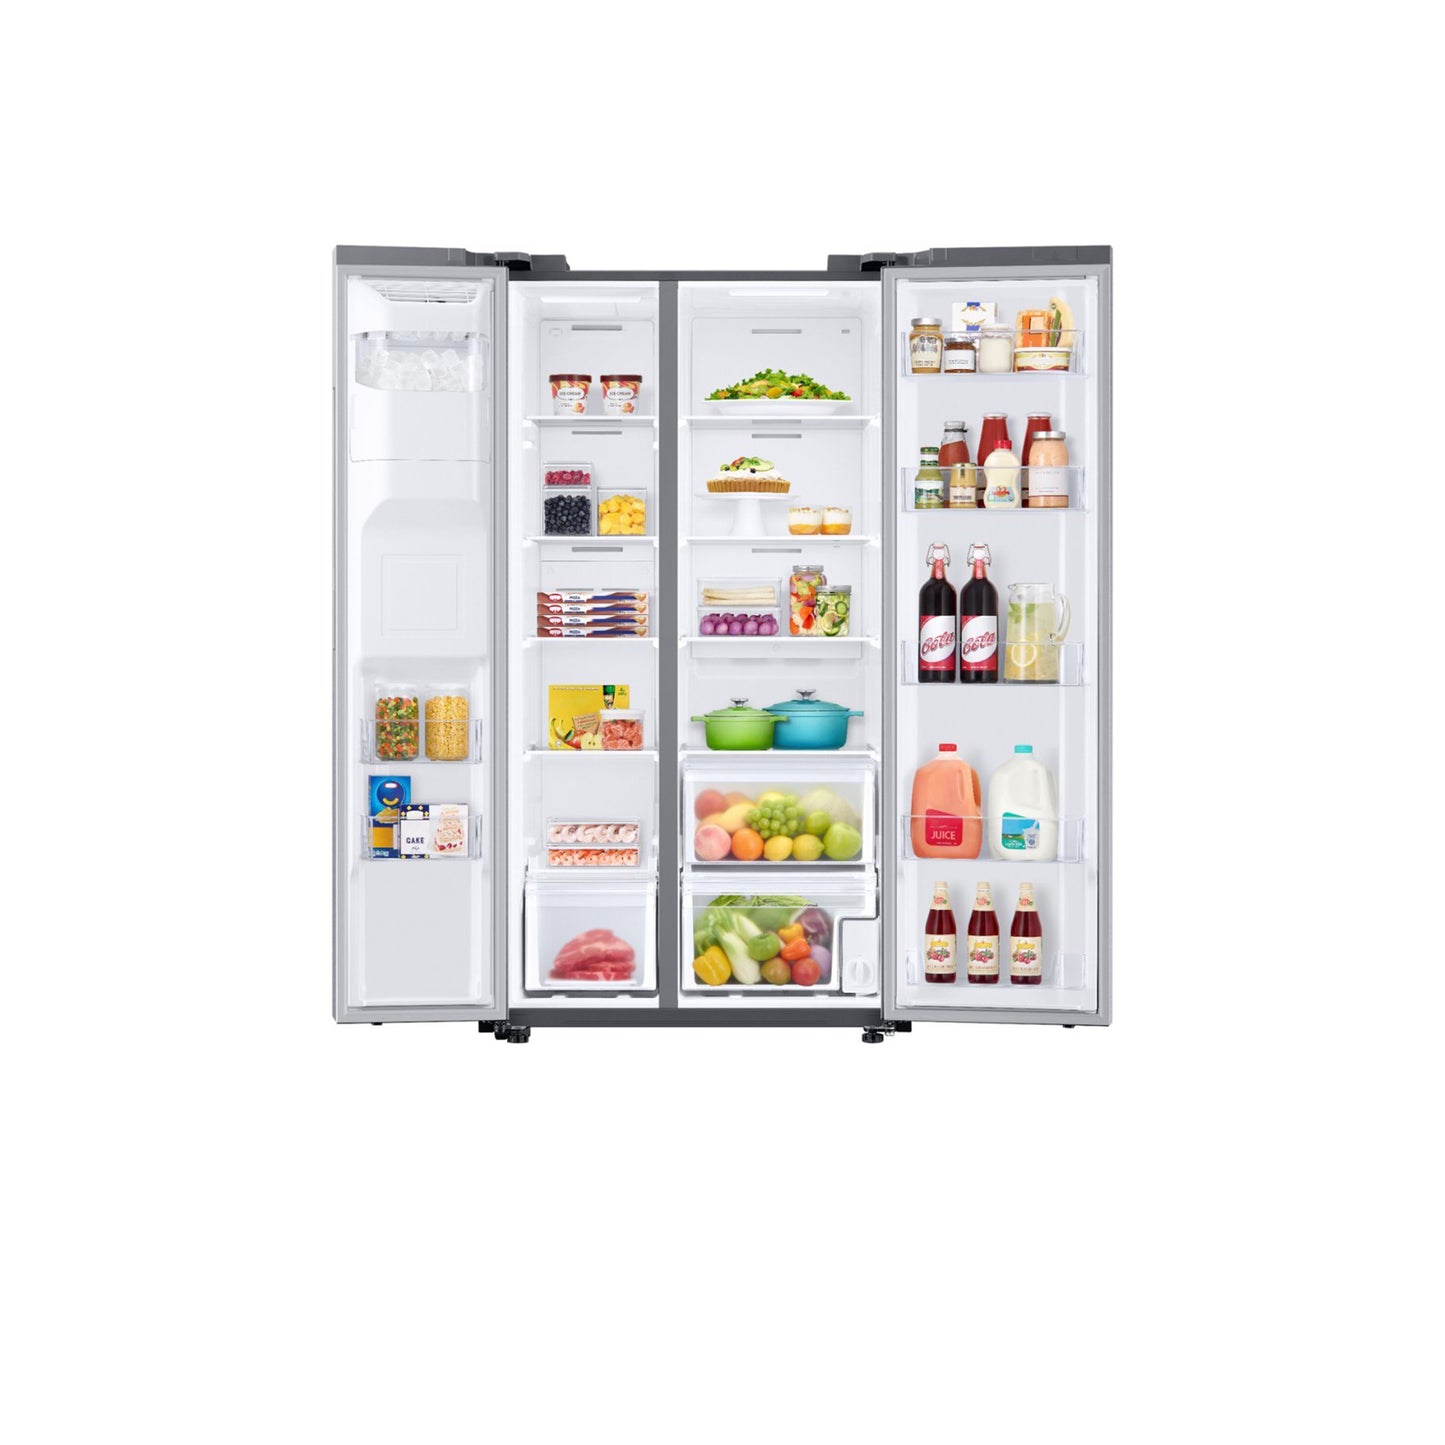 22 cu. ft. Counter Depth Side-by-Side Refrigerator in Stainless Steel.